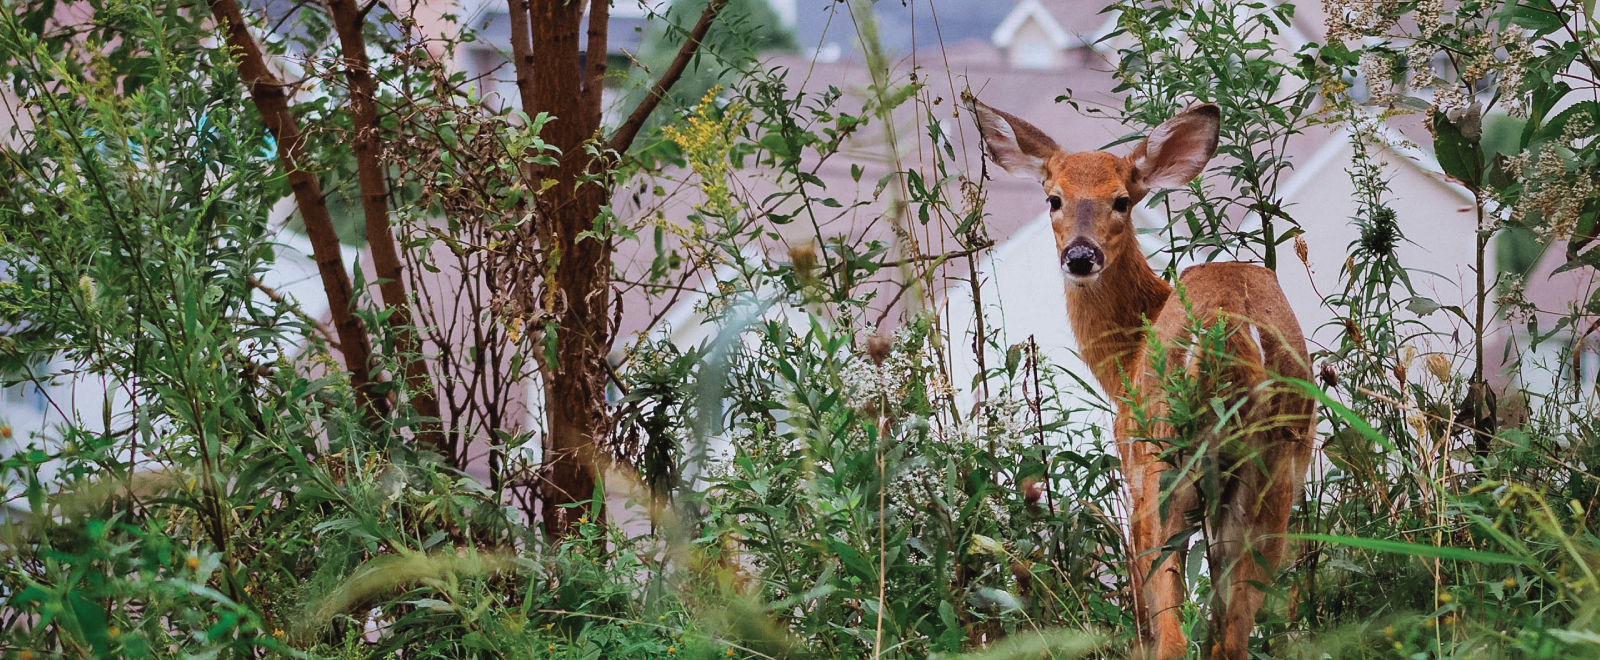 A whitetail deer on the edge of an urban area